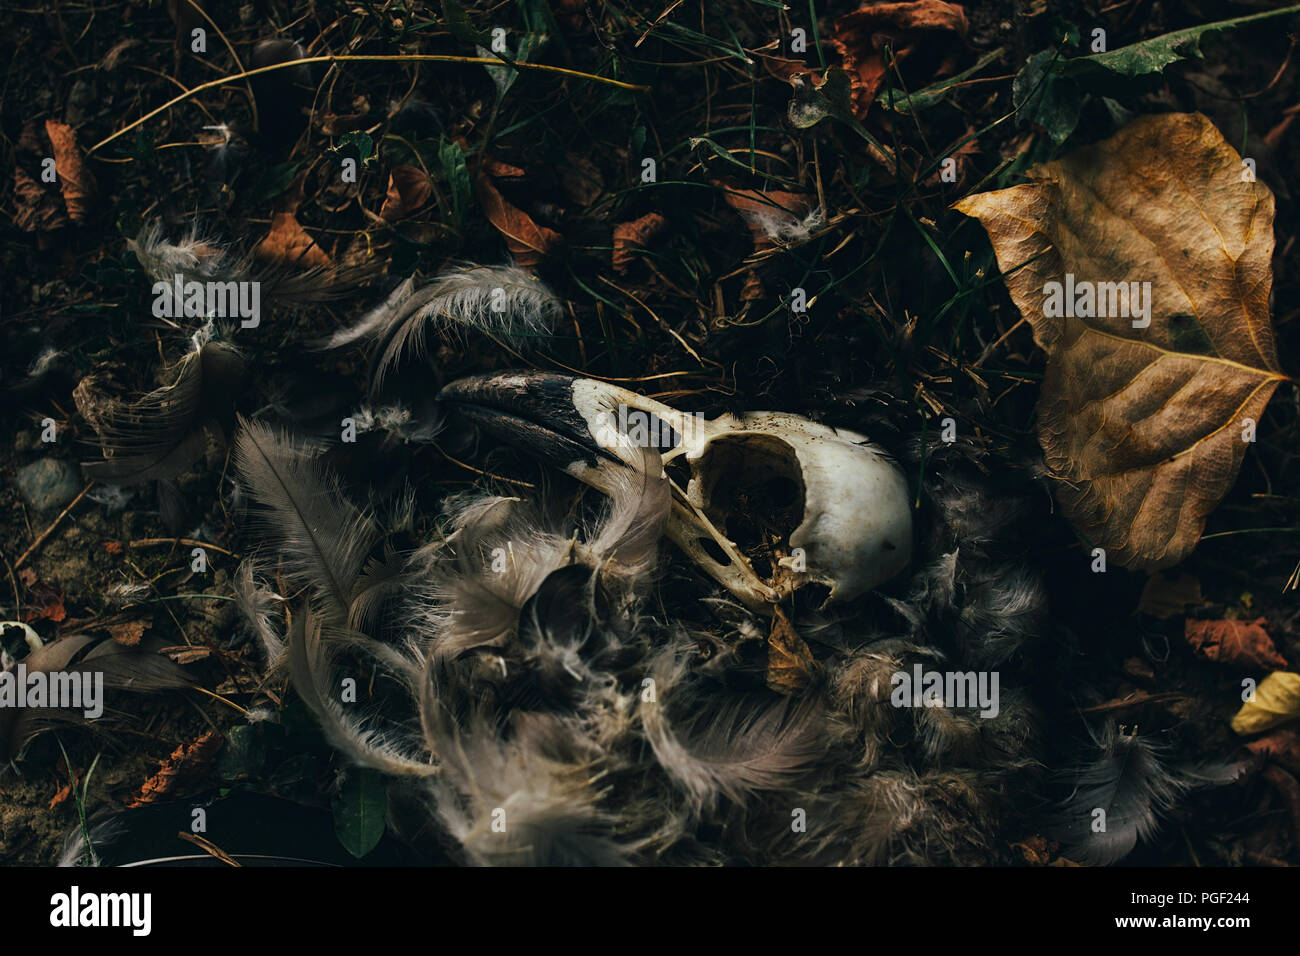 Dead bird skull lying in the grass with fallen leaves and feathers Stock Photo